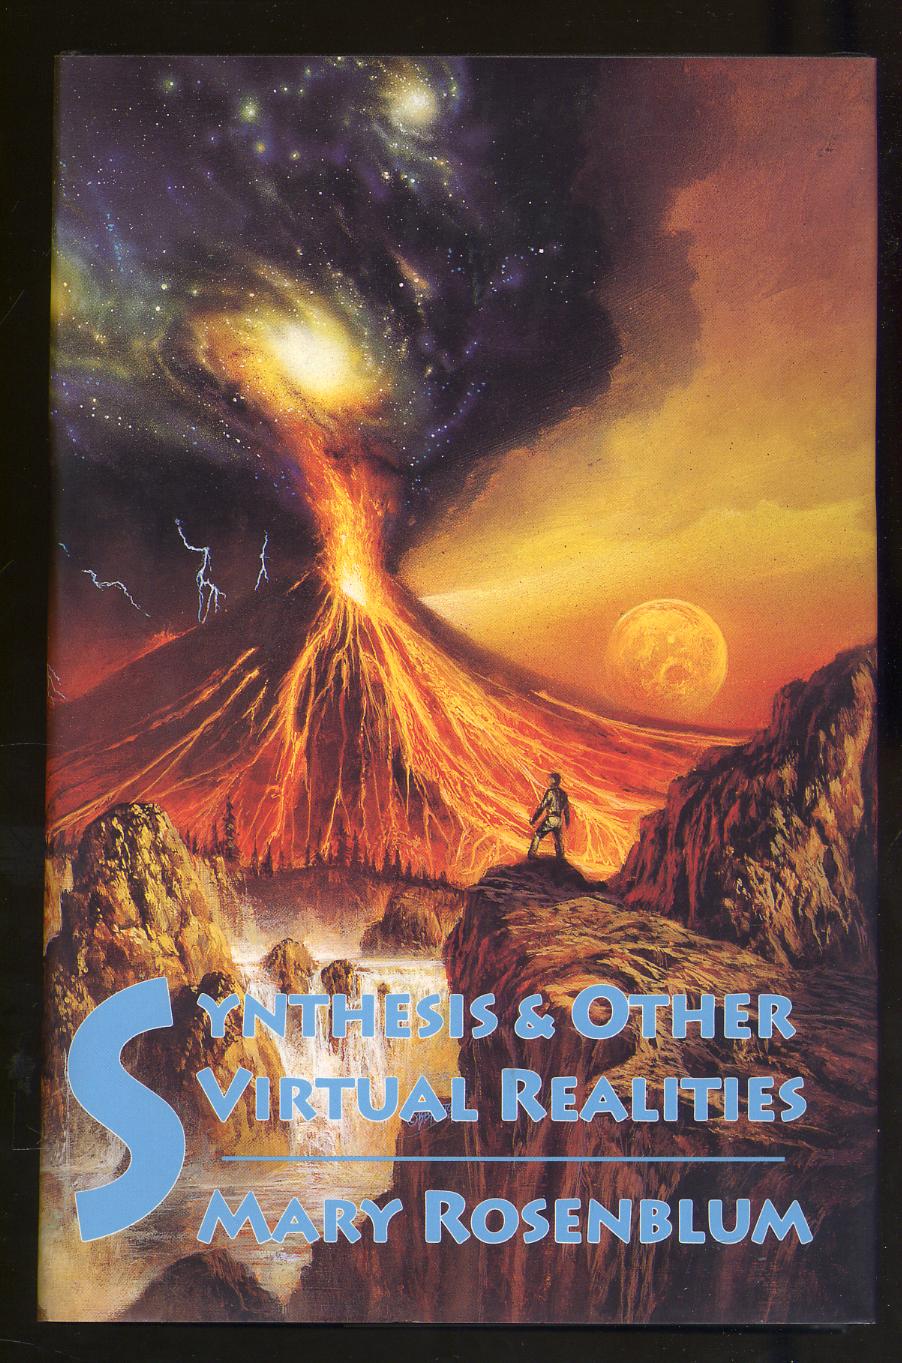 Synthesis and Other Virtual Realities - ROSENBLUM, Mary